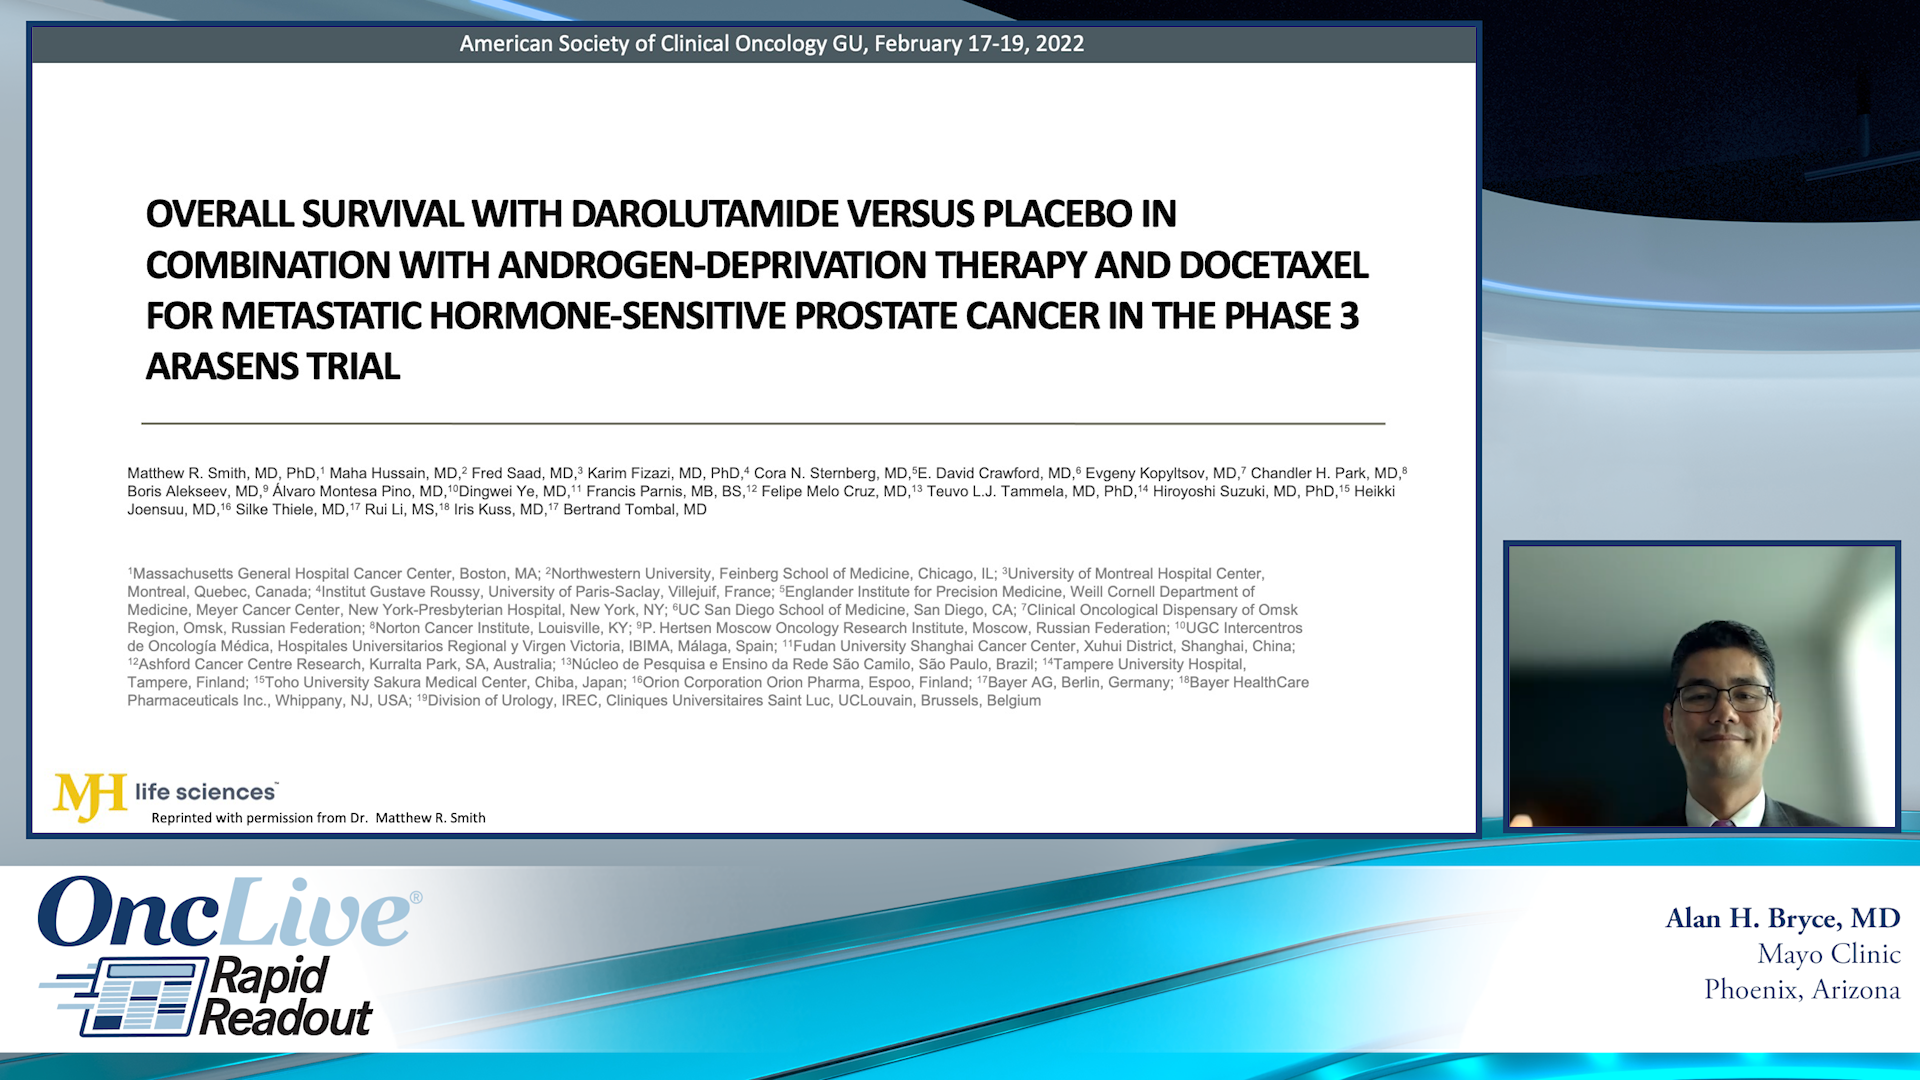 Rapid Readout: ARASENS: Darolutamide Versus Placebo in Combination With ADT and Docetaxel for Metastatic Hormone-Sensitive Prostate Cancer